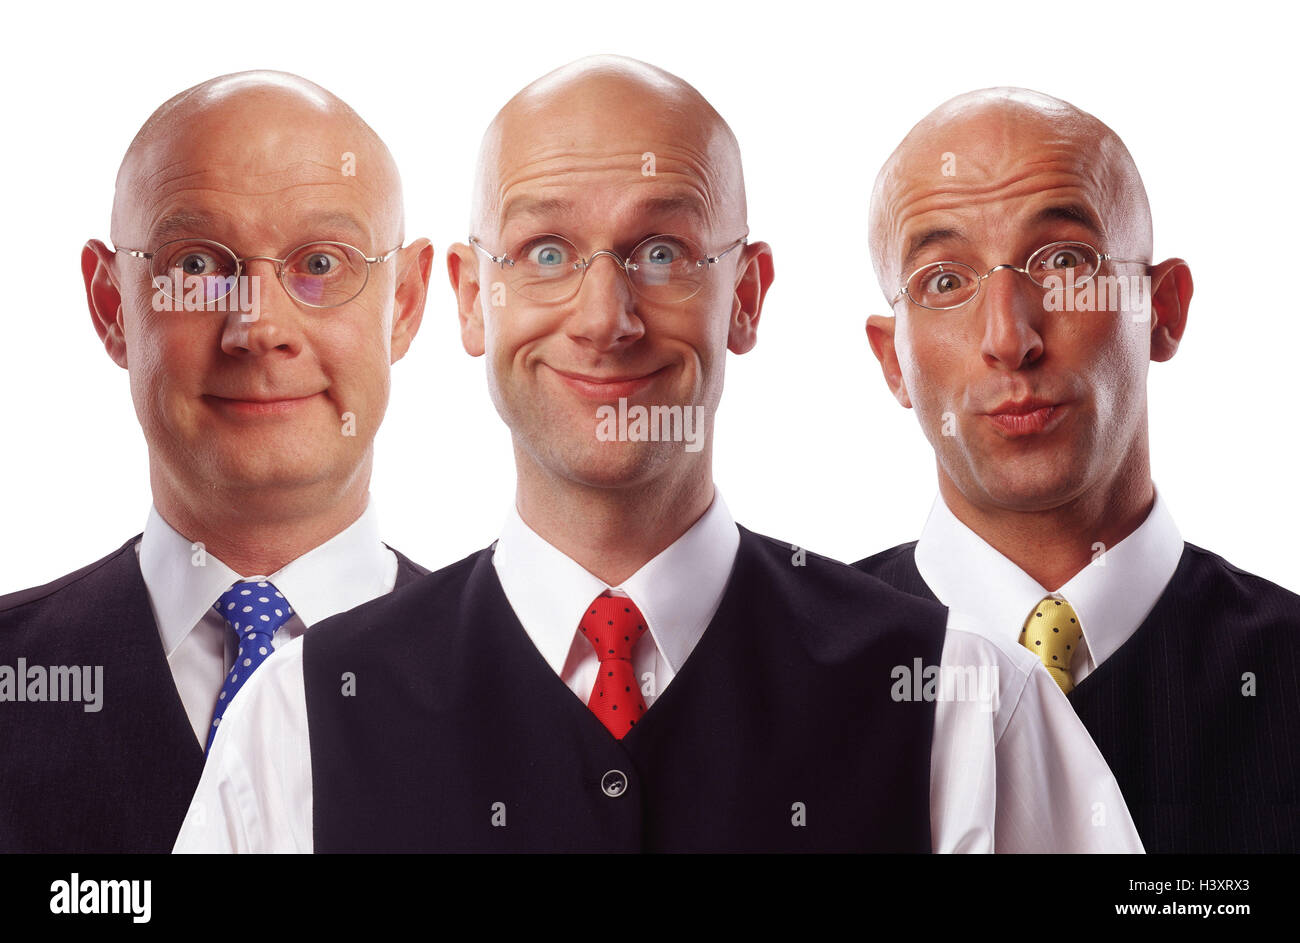 Men, three, bald heads, glasses, shirt, waistcoat, facial play, pleases, smile, portrait, Men, studio, manager, business people, smile, expectantly, happy, bald-headed, hairlessly, ties, Nicklebrillen, close up, cut out, Stock Photo